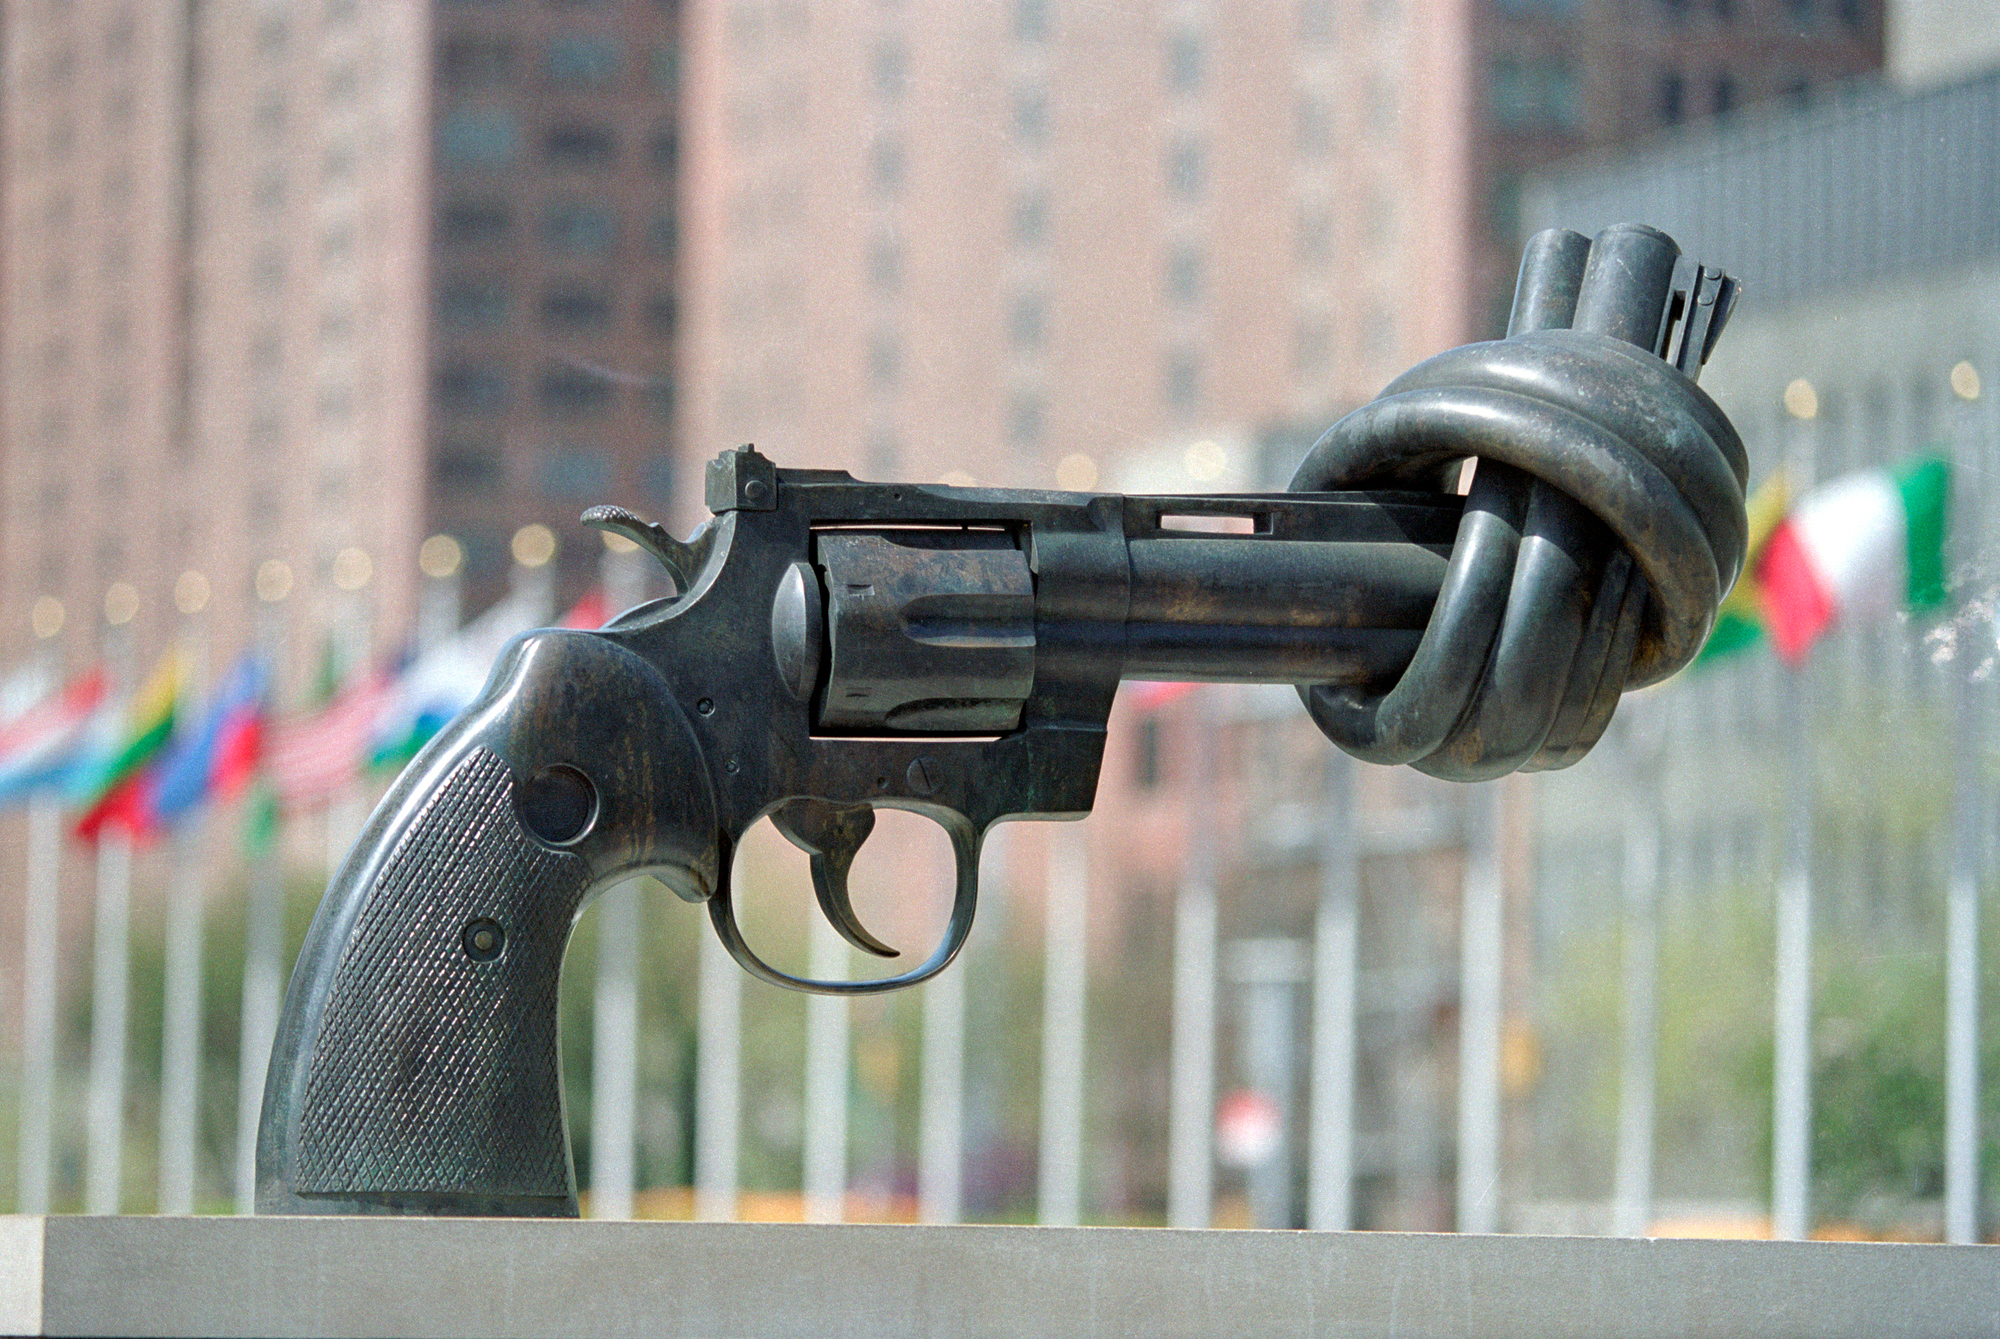 Sculpture of a gun with a knot on the barrel. 